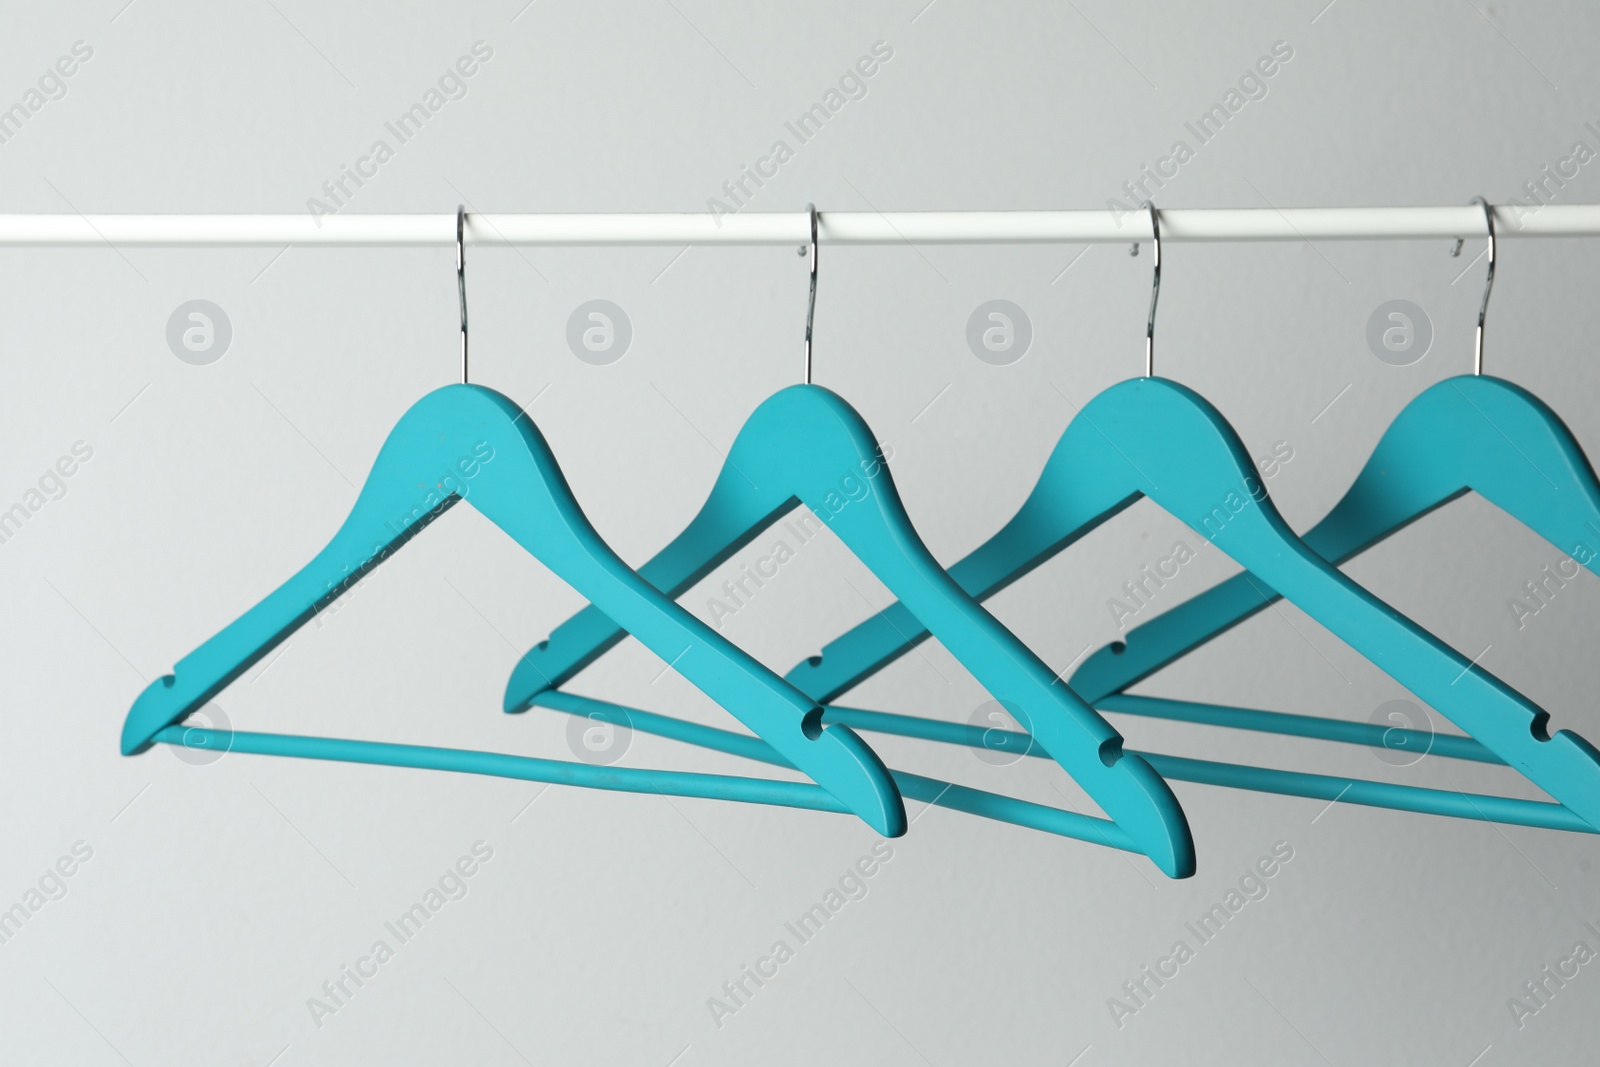 Photo of Empty turquoise clothes hangers on metal rail against light grey background